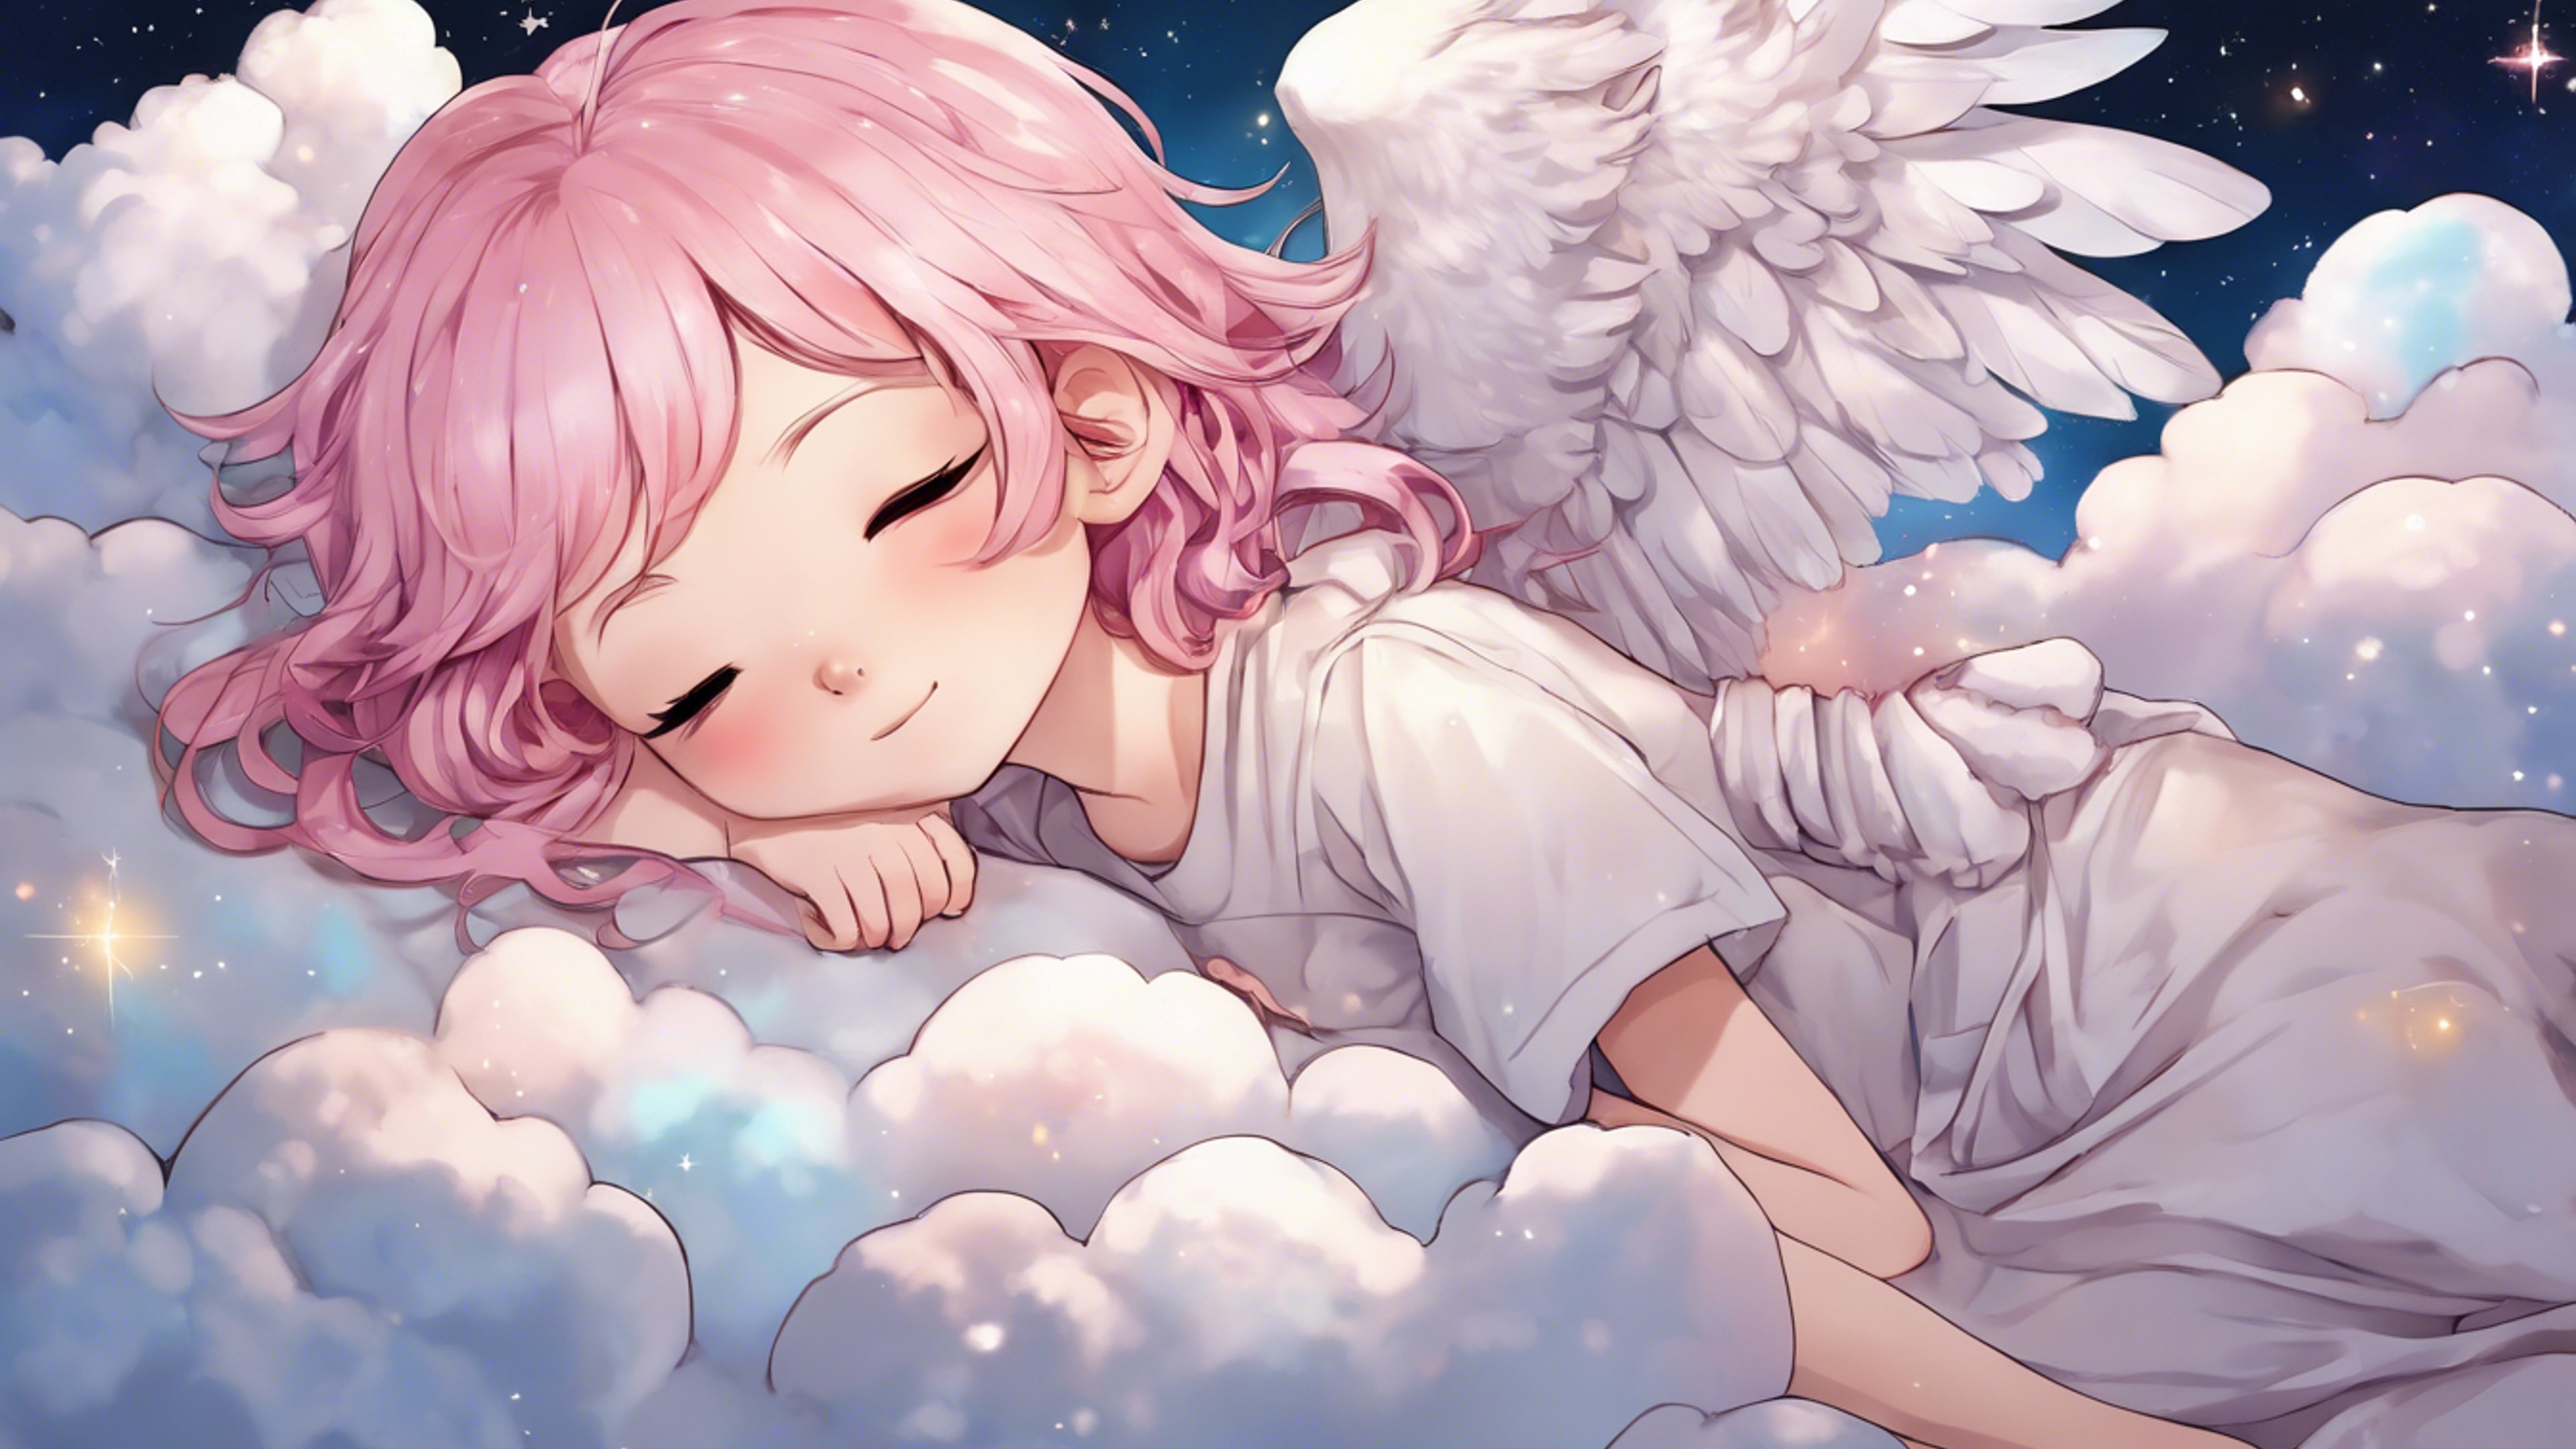 A chibi-style anime girl with pastel pink hair and angel wings, sleeping peacefully on a fluffy cloud under a starry night sky. Tapeet[4a6f35b80bd74bd2872d]